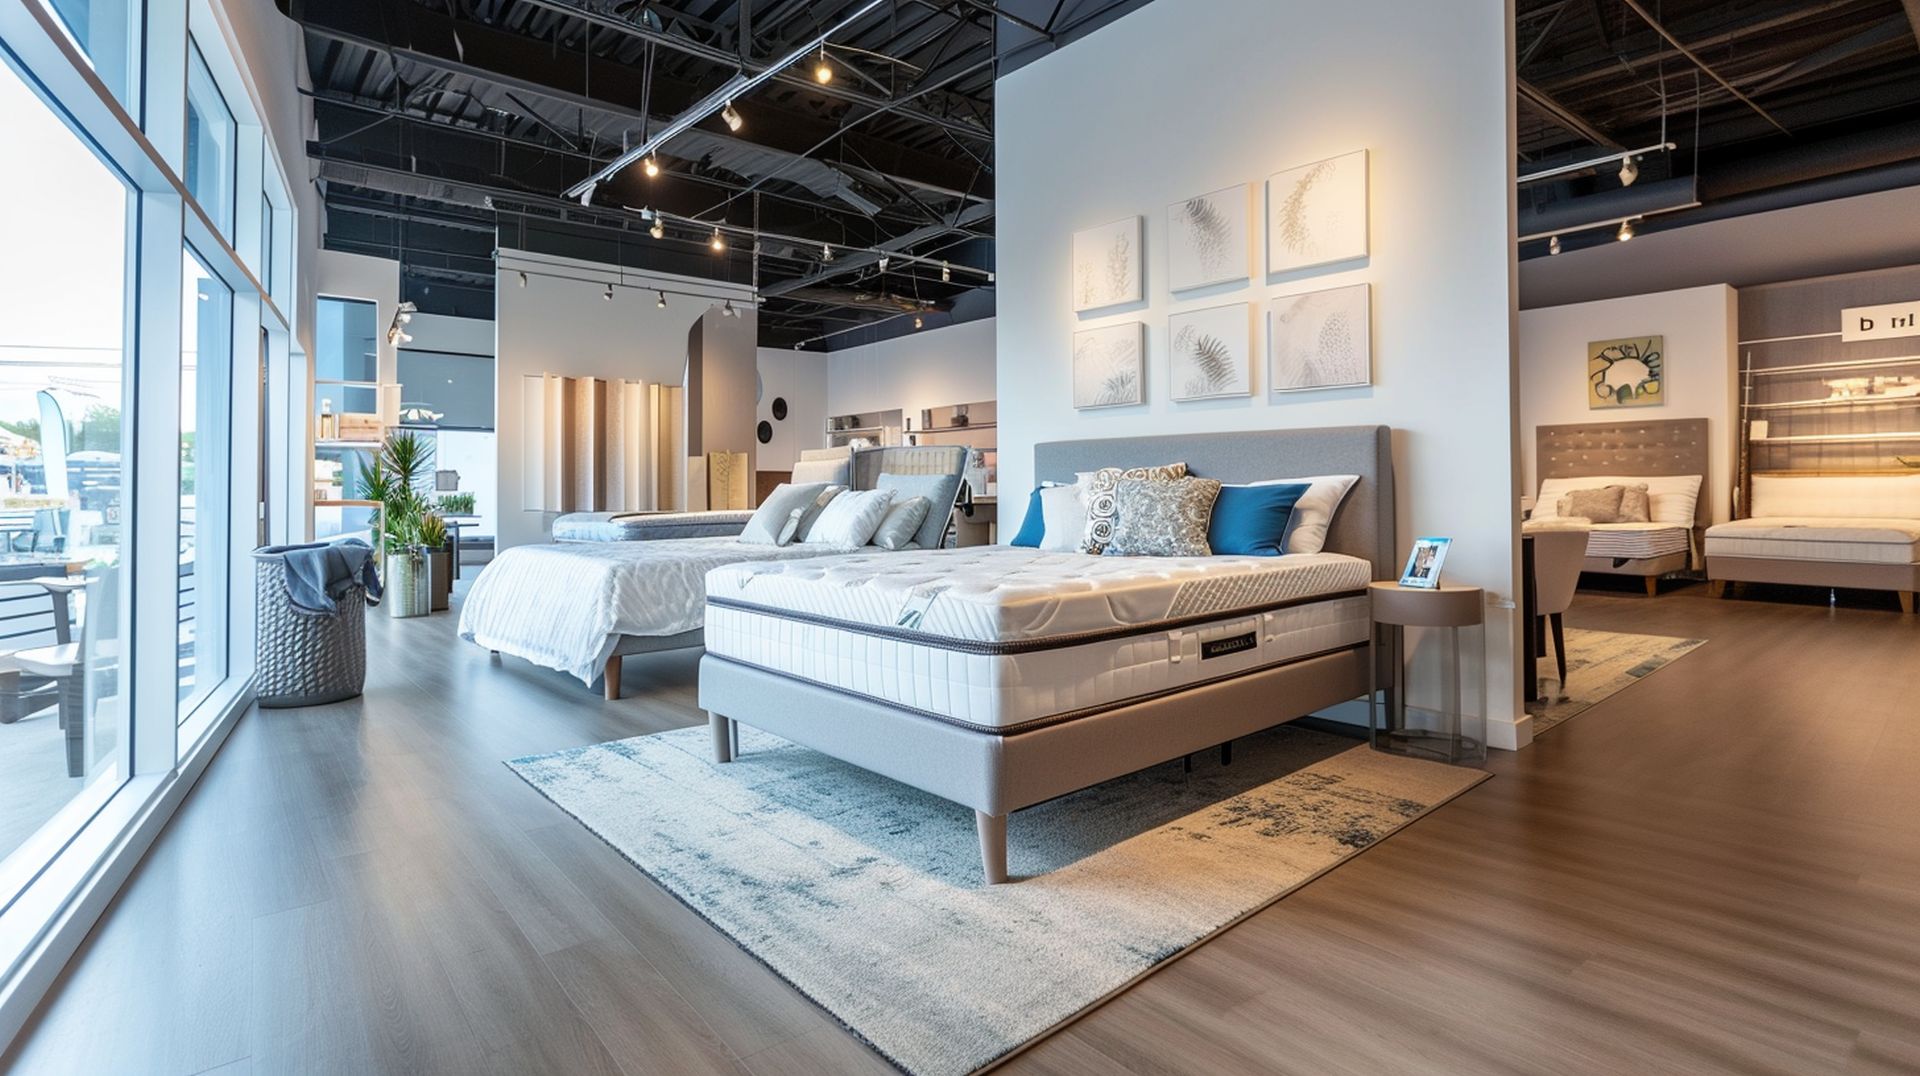 Local Coeur d'Alene mattress stores have the best prices, sales, and deals if you're looking for a new mattress in Coeur d'Alene